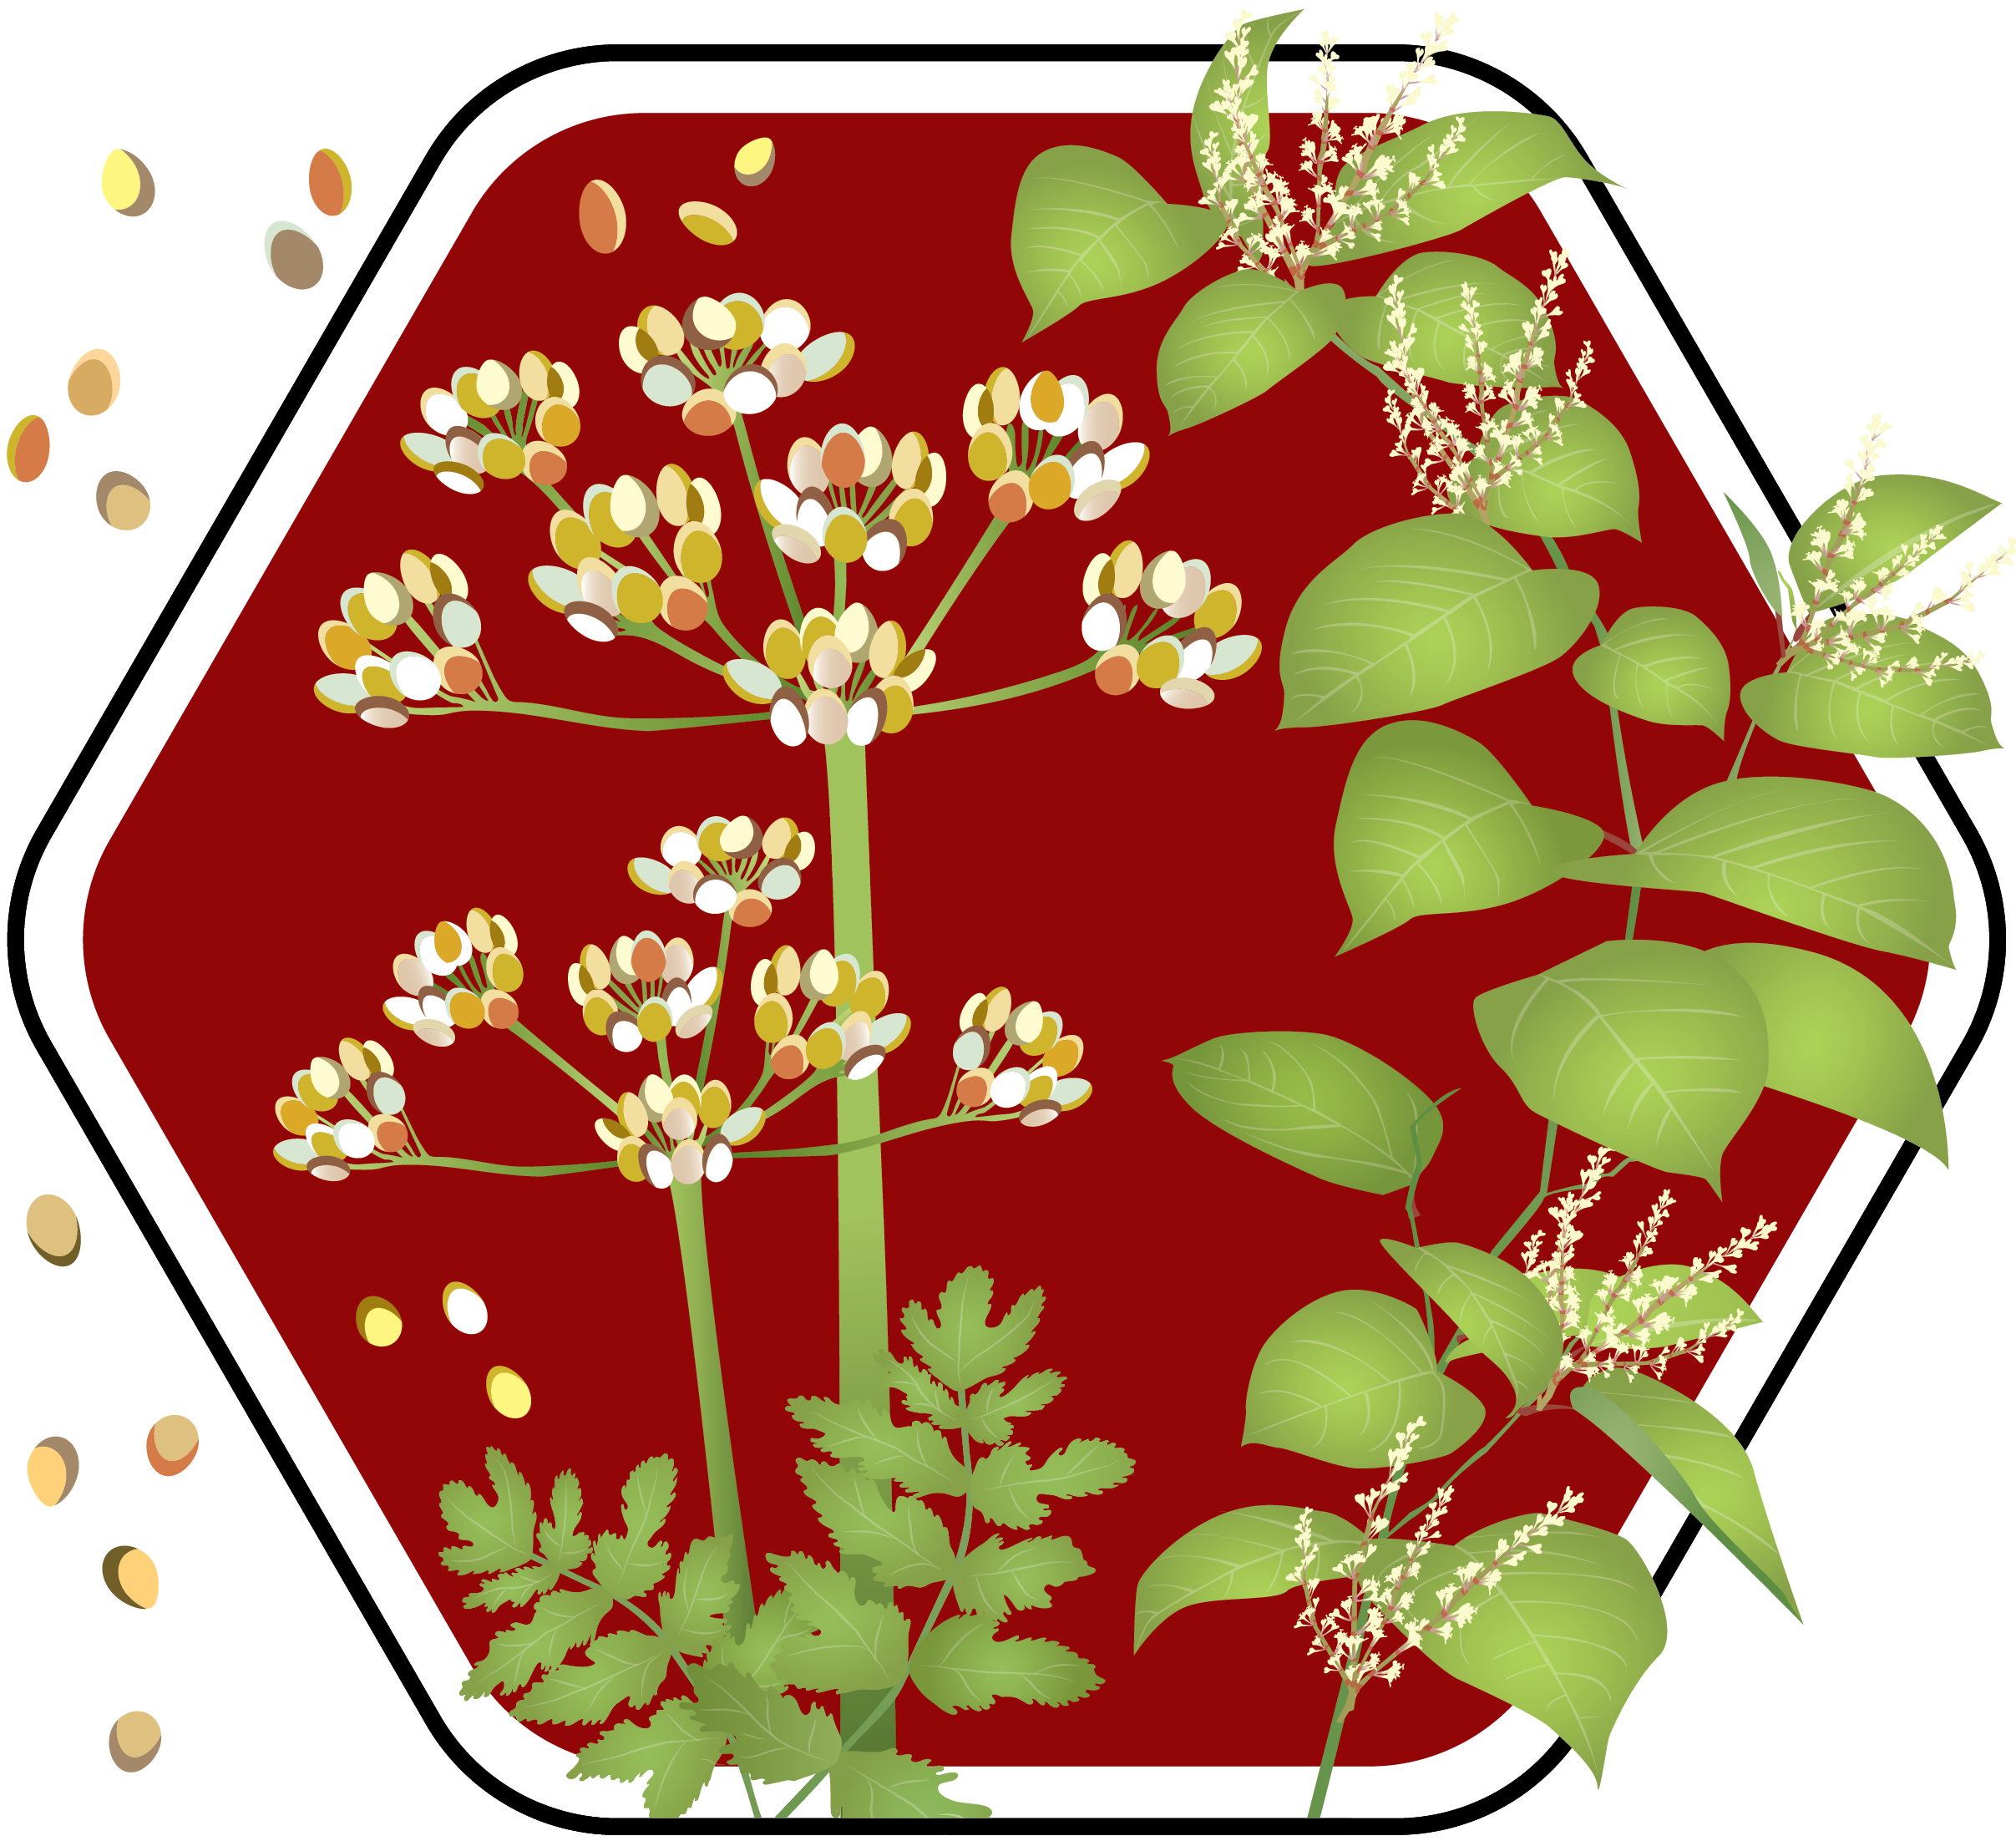 Pesky Plant Trackers campaign badge with wild parsnip and knotweed on a stop sign